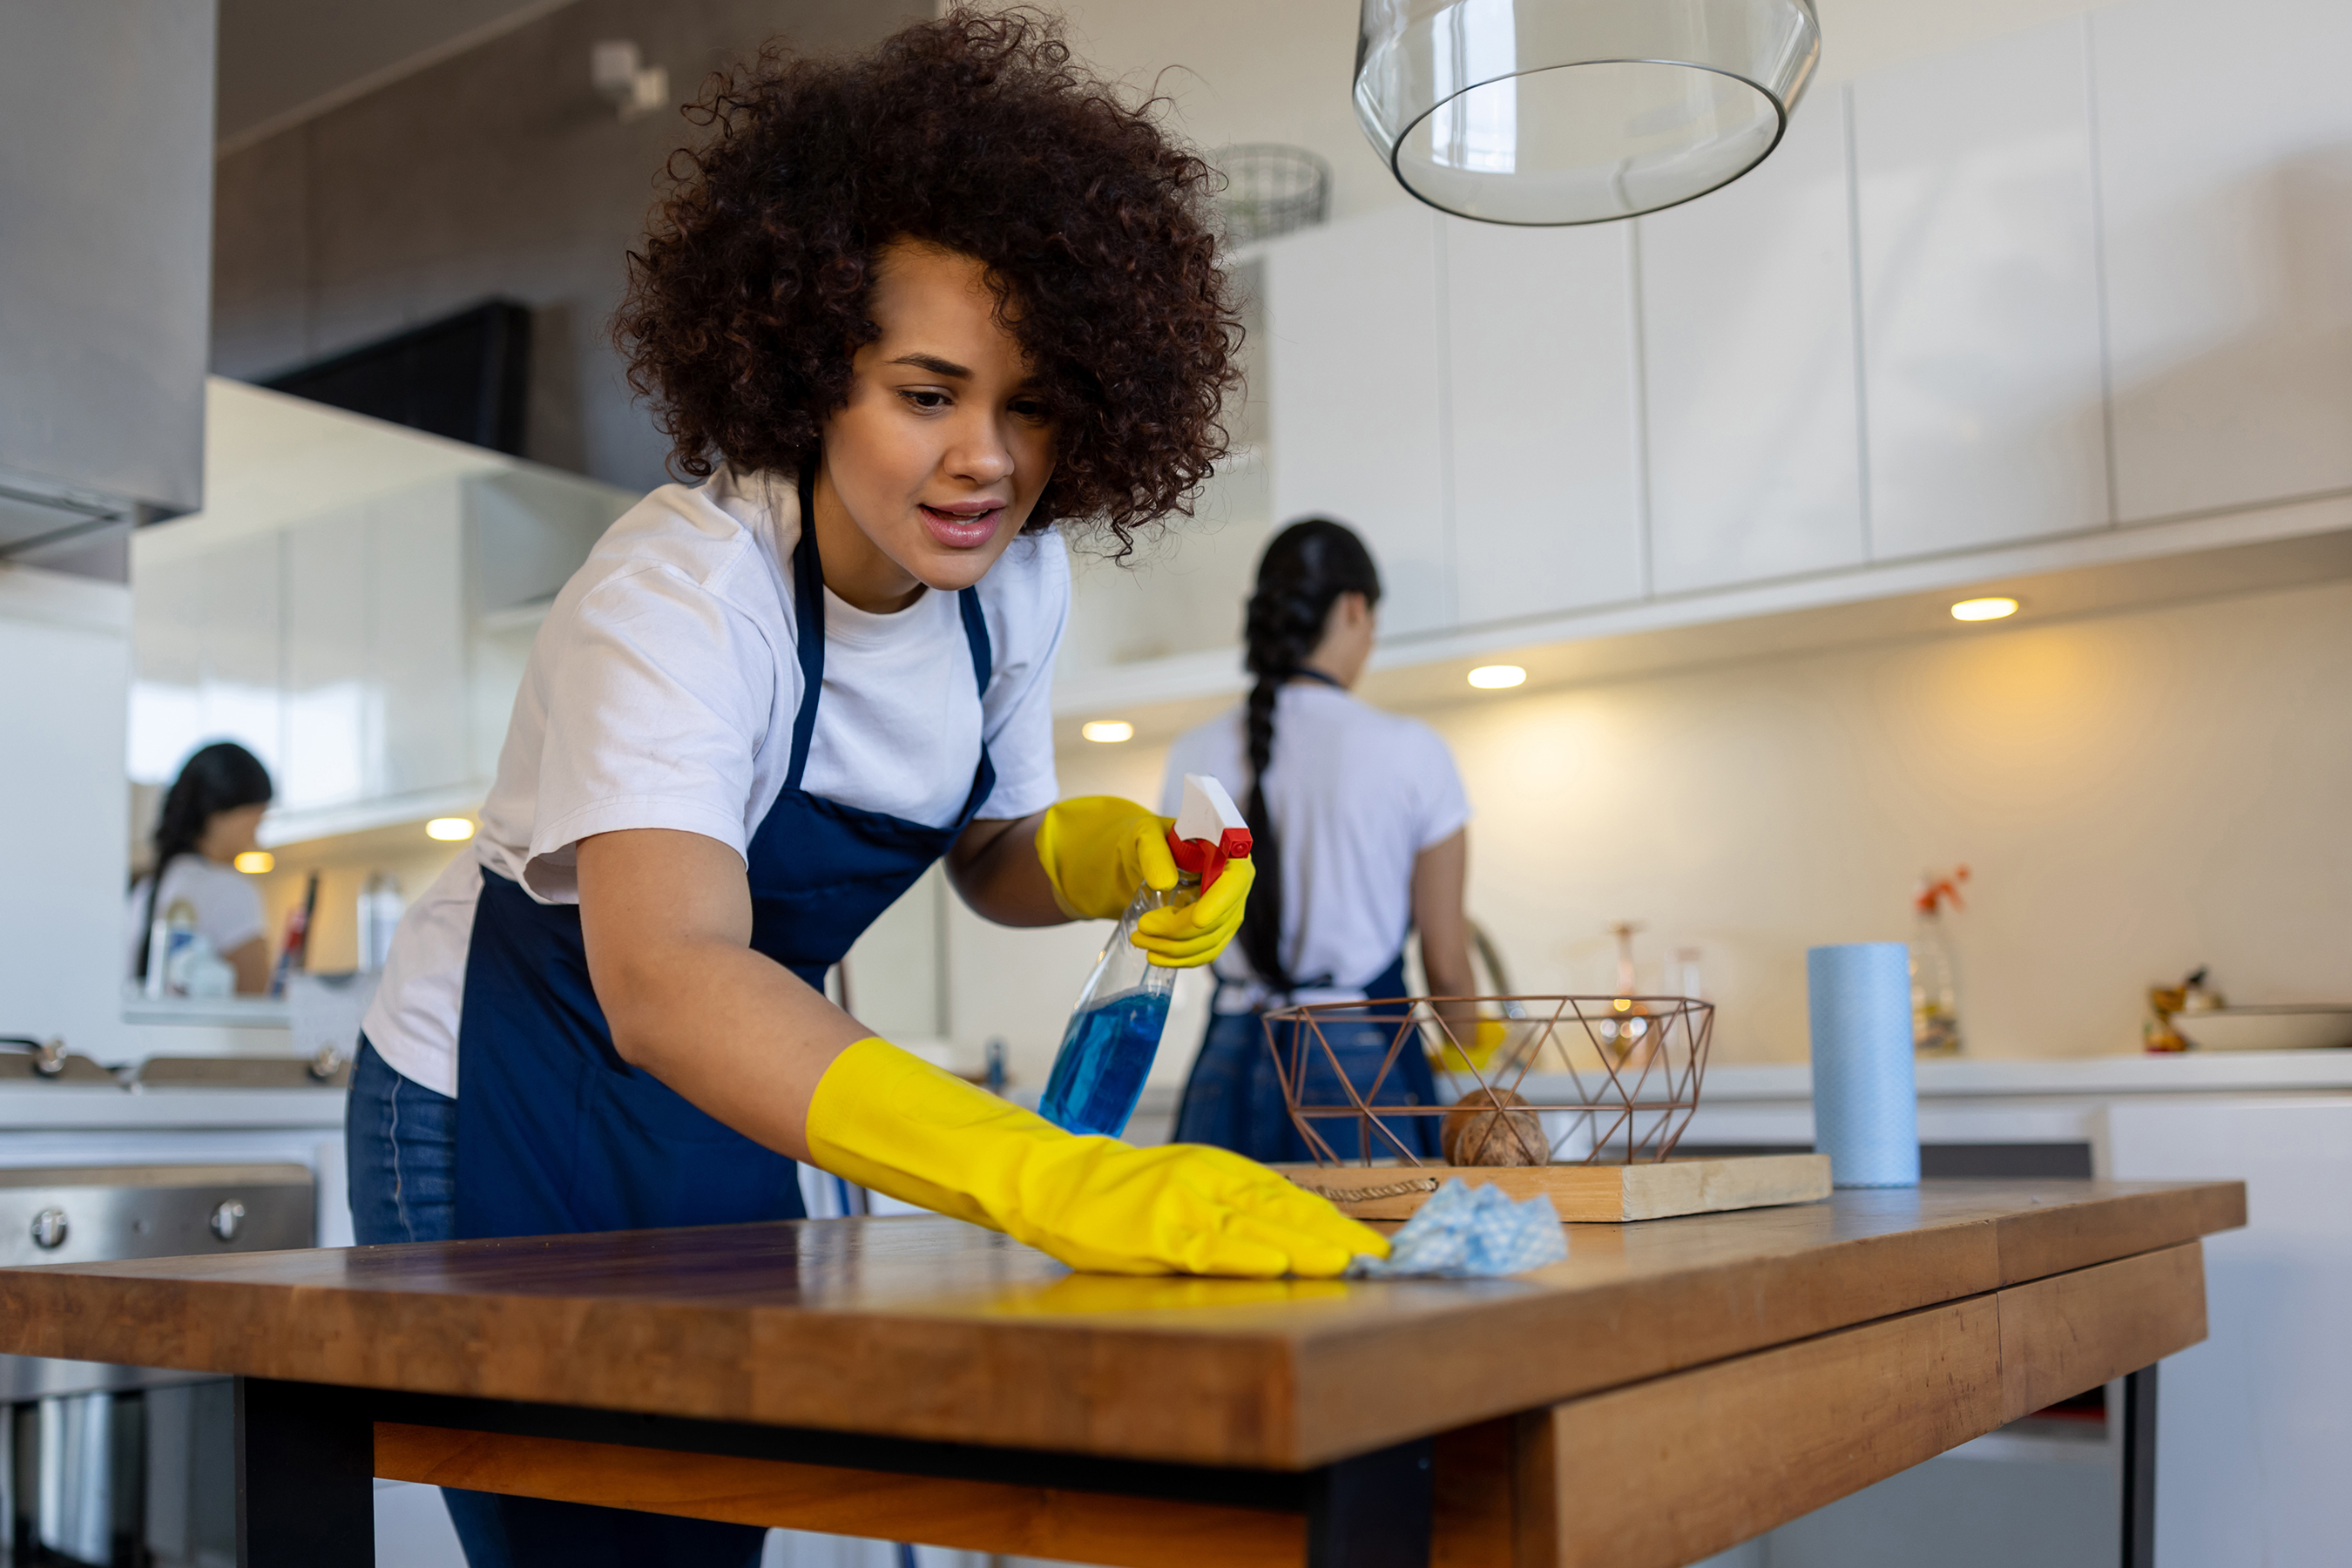 How to Hire Housekeepers